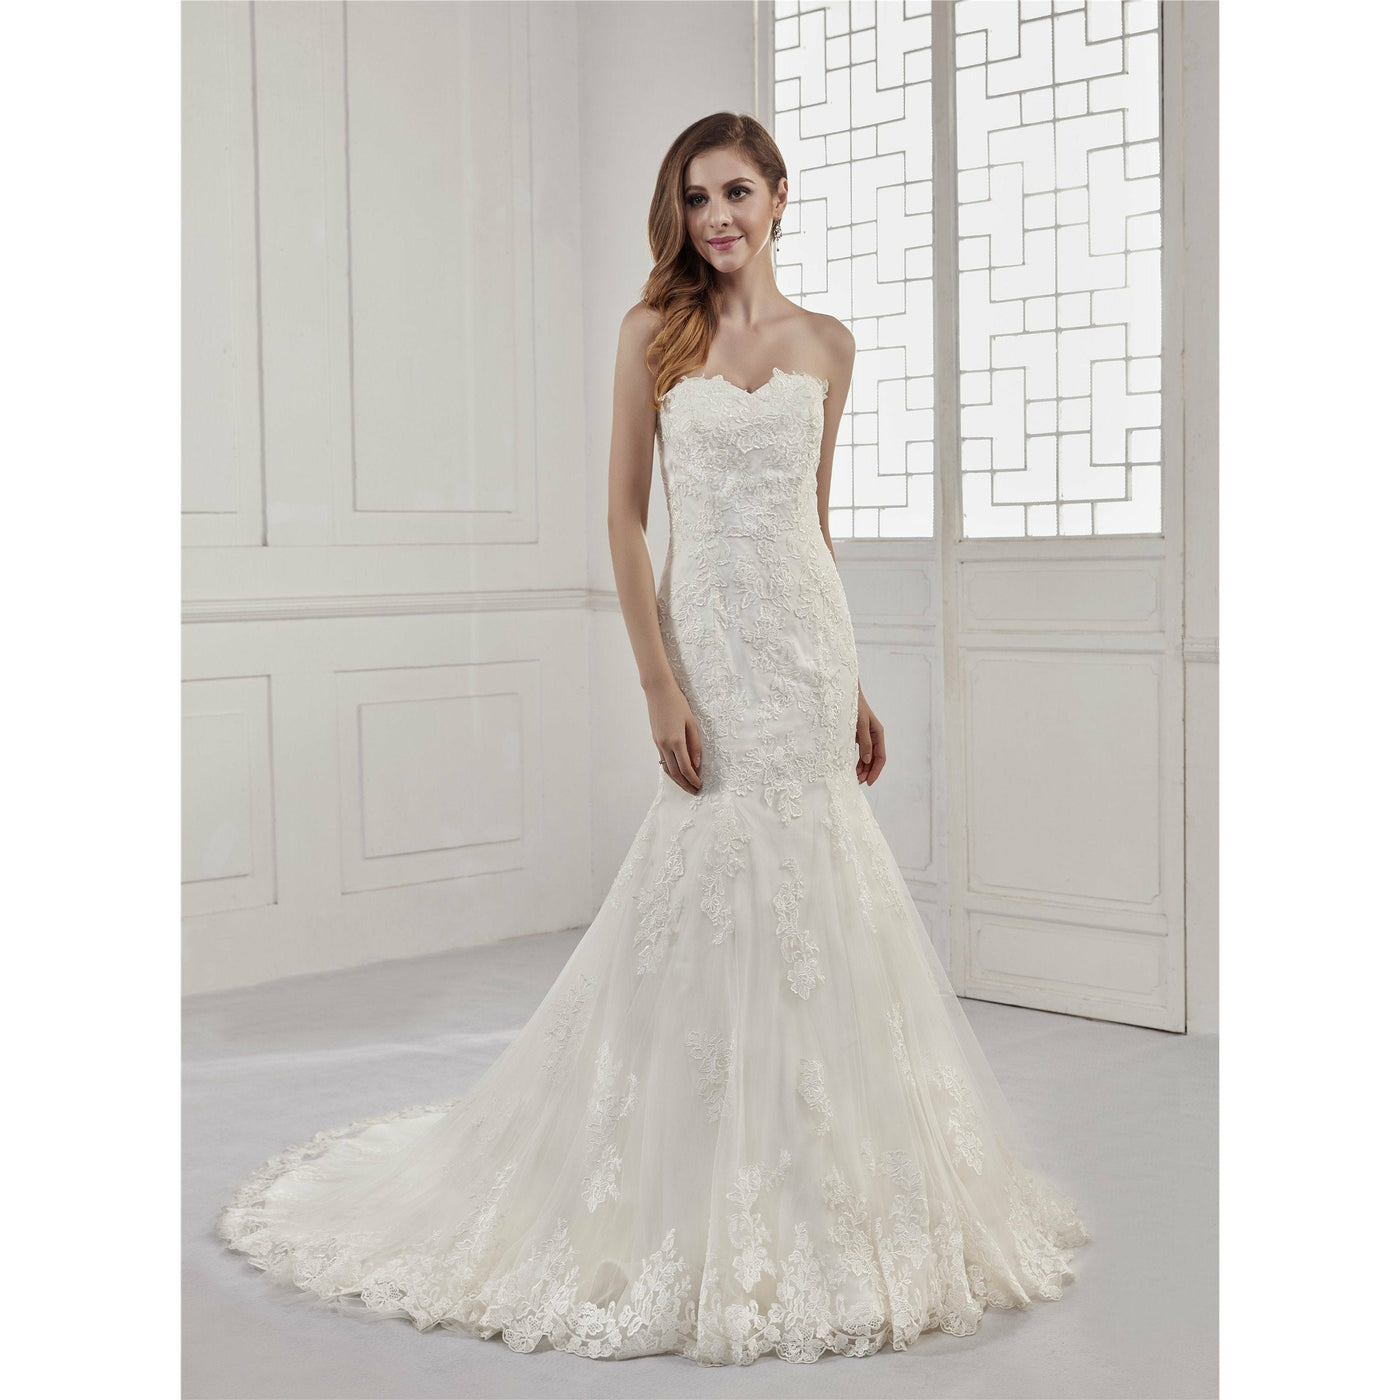 Chicely sweetheart floral applique mermaid wedding dress